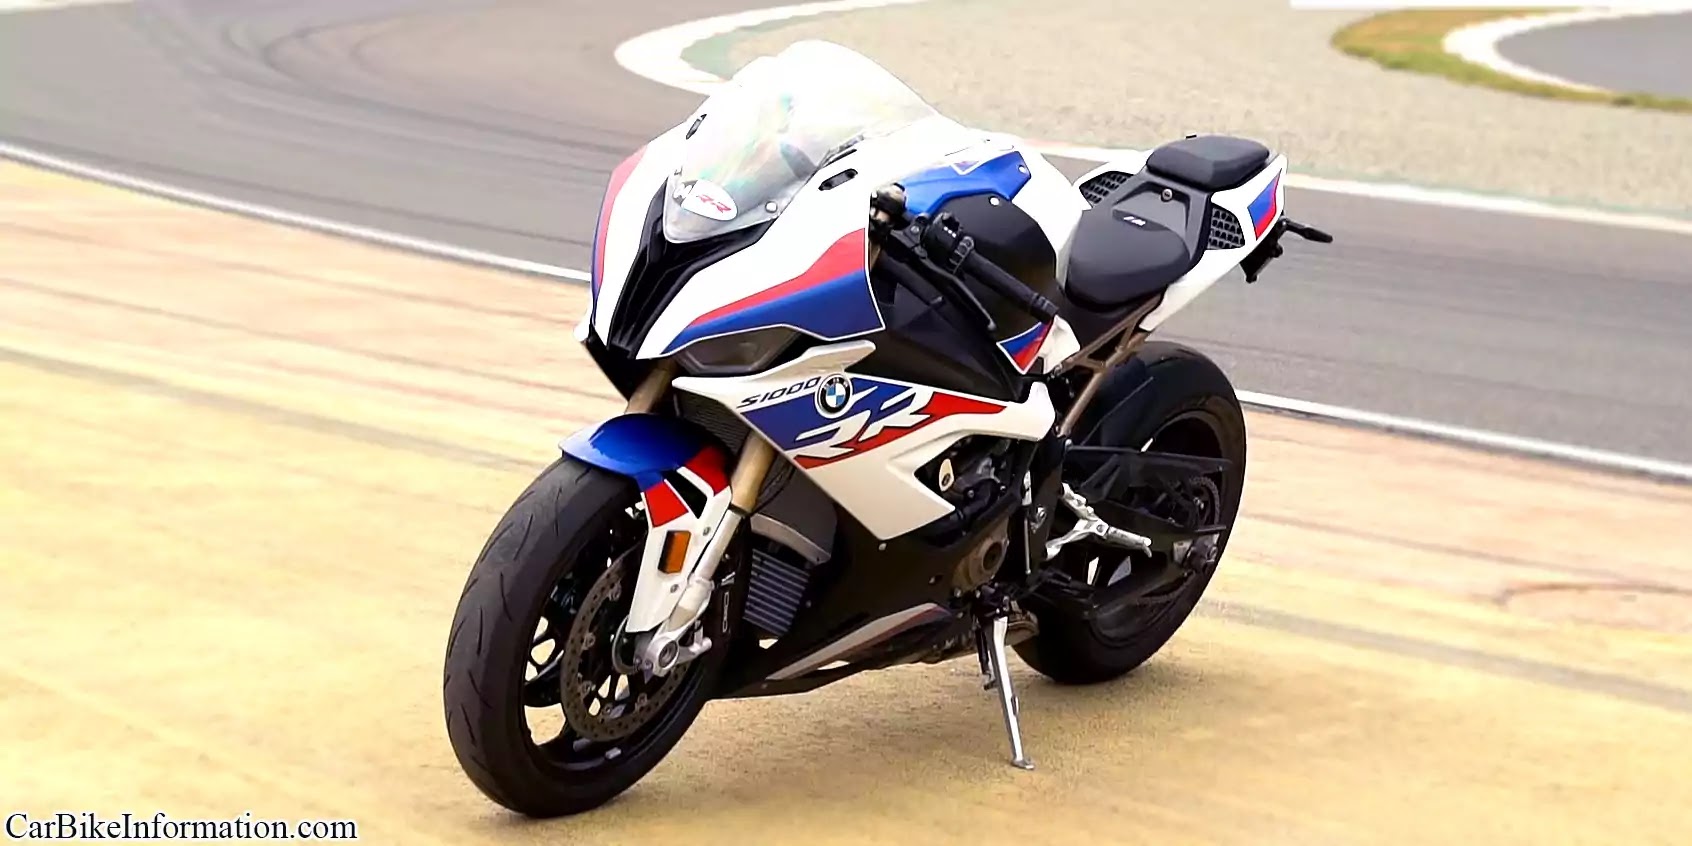 BMW S1000RR Review, Price, Top Speed, Mileage - CarBikeInformation